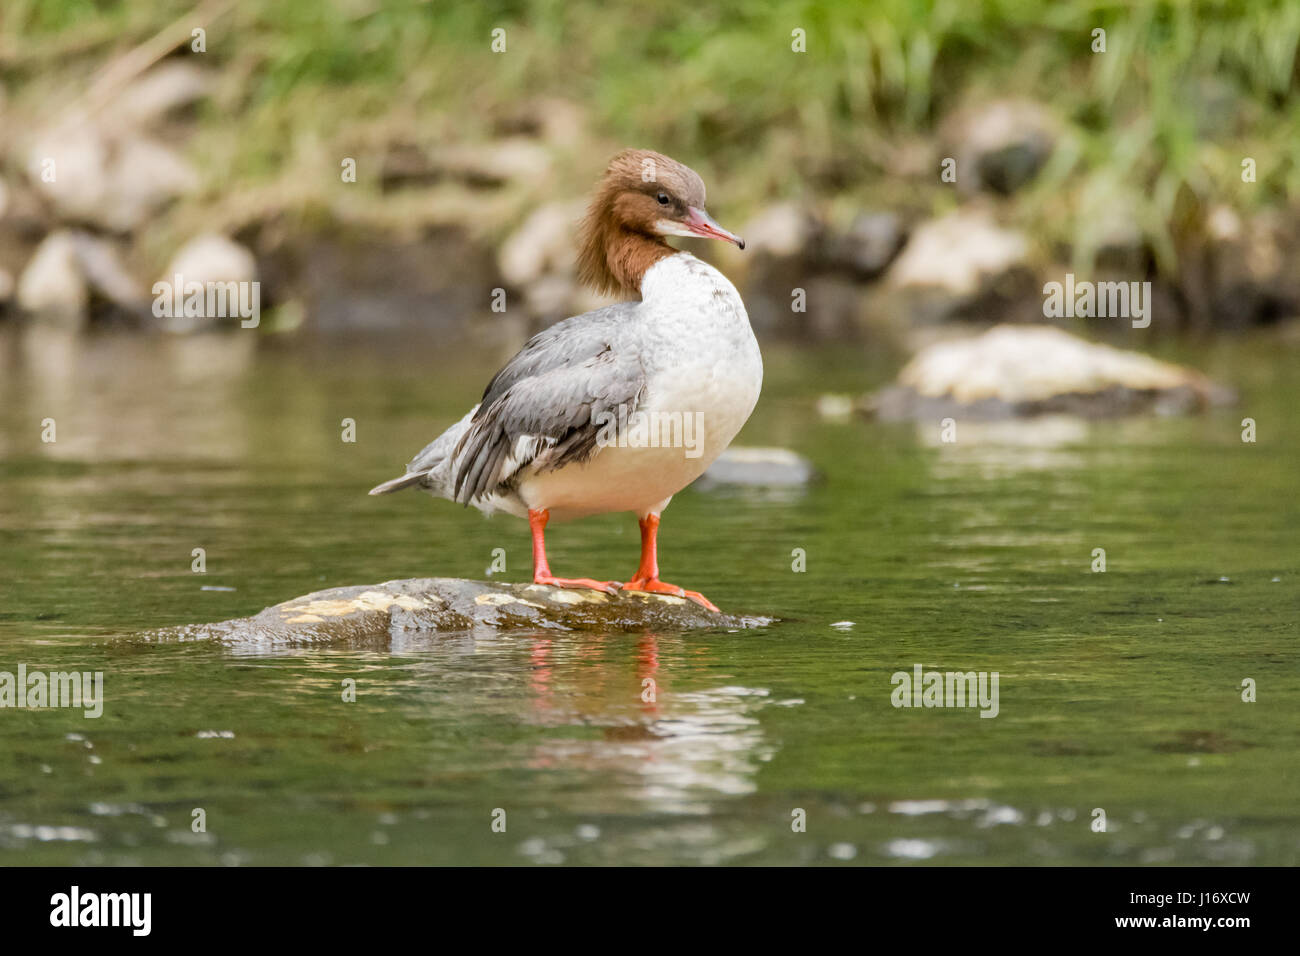 Goosander (Mergus merganser) female. Sawbill duck in the family Anatidae, with crest and serated bill, on the River Taff, Cardiff, UK Stock Photo